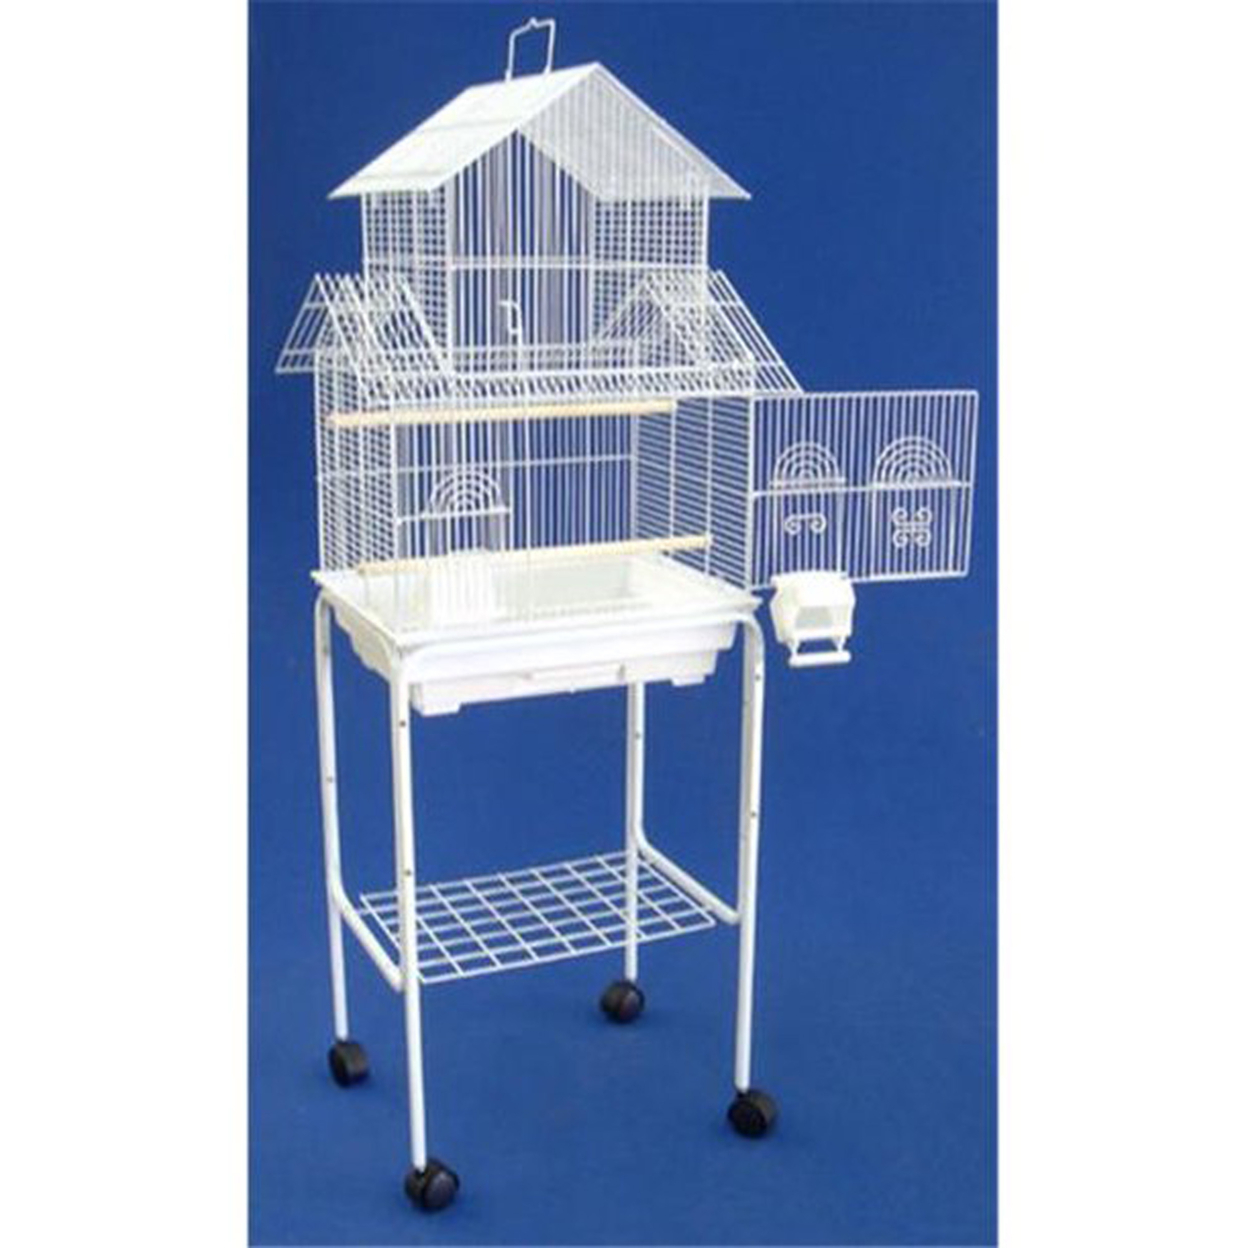 Ymlgroup 5844 3 by 8" Bar Spacing Pagoda Small Bird Cage with Stand - 18"x14" in White - image 1 of 2